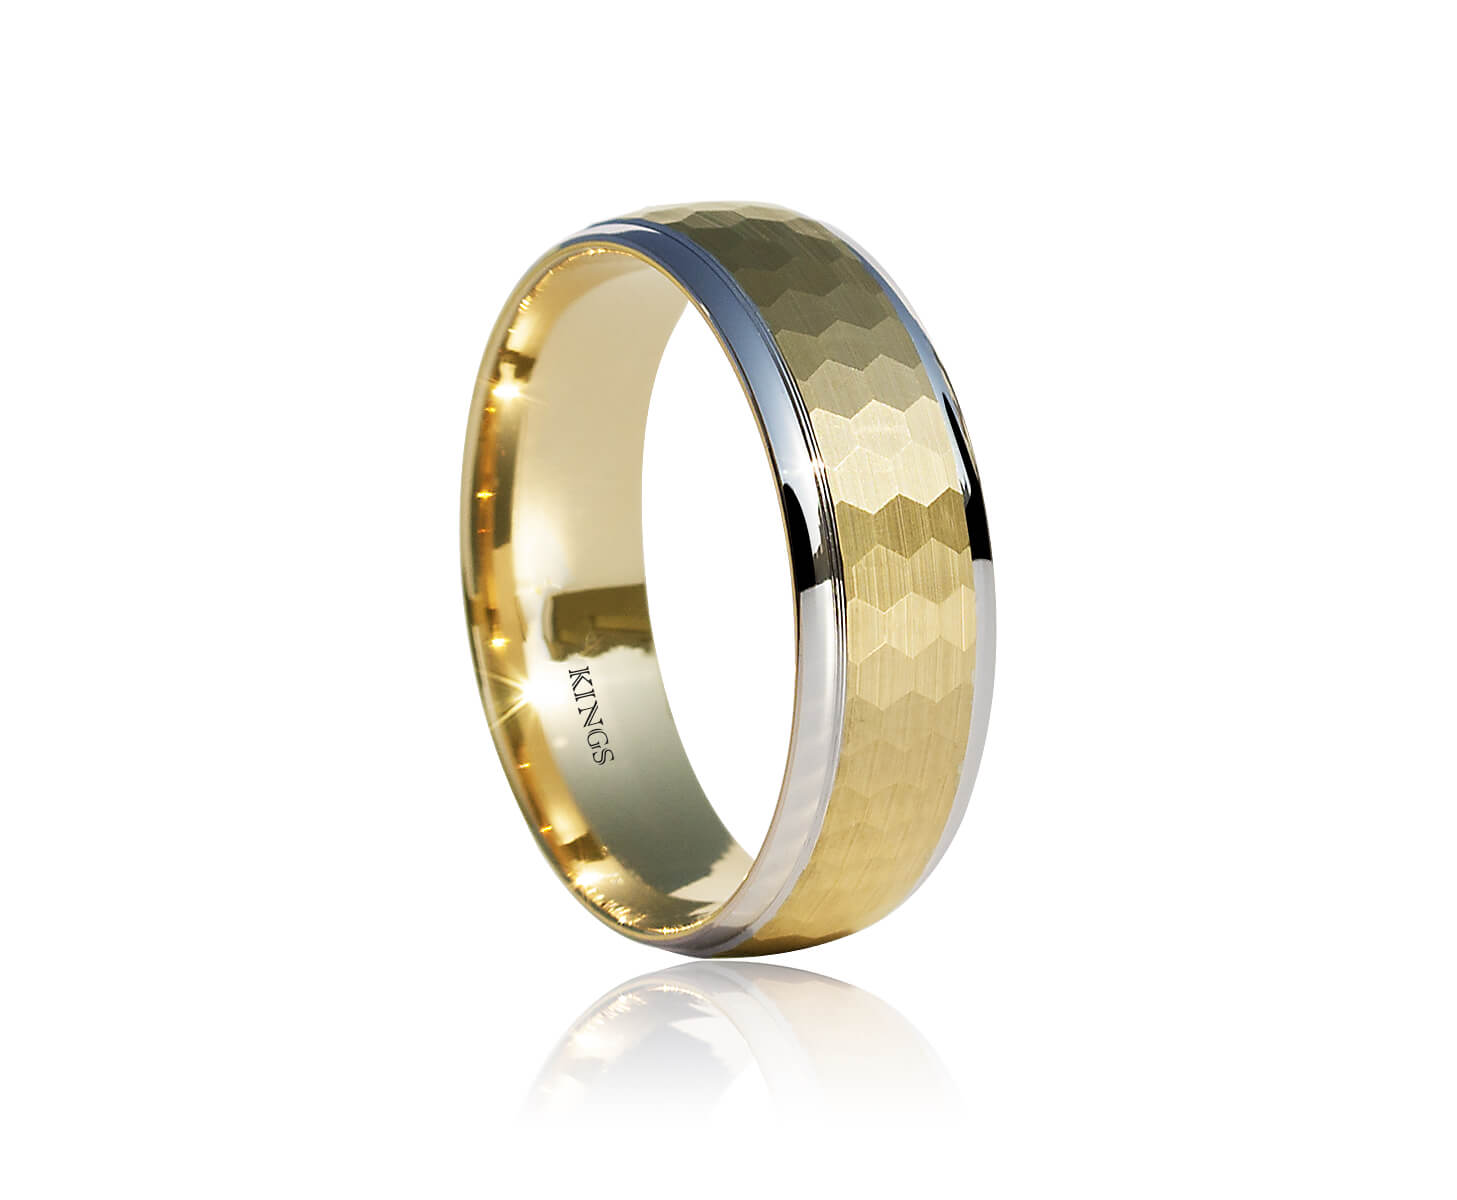 Men's Band Rings 18 Karat Matte Hexagon Textured Yellow Gold Two Tone Ring with Comfort Fit